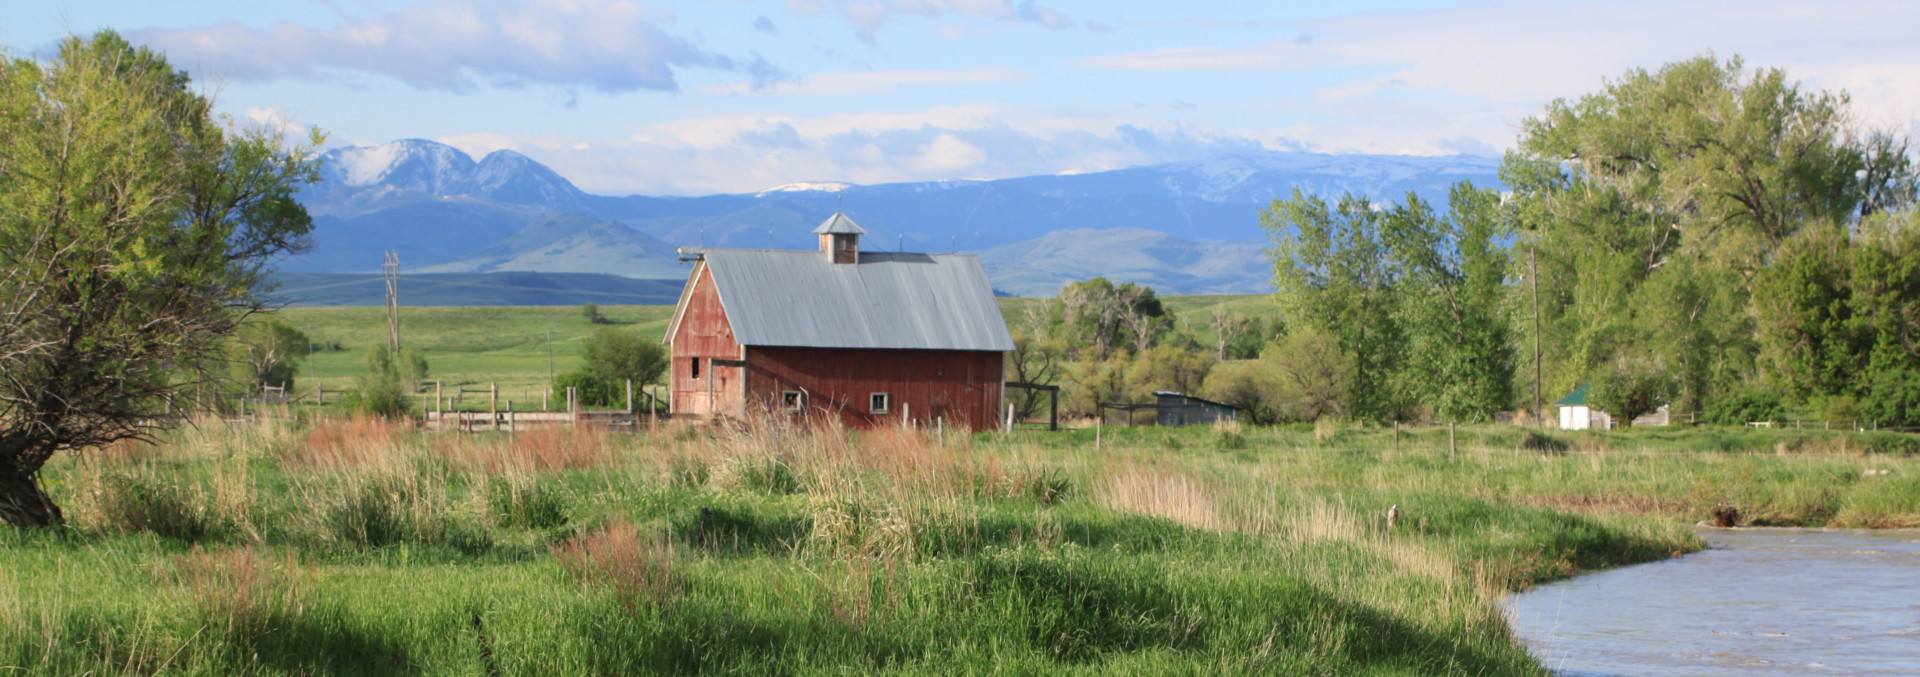 montana ranch for sale otter creek ranch